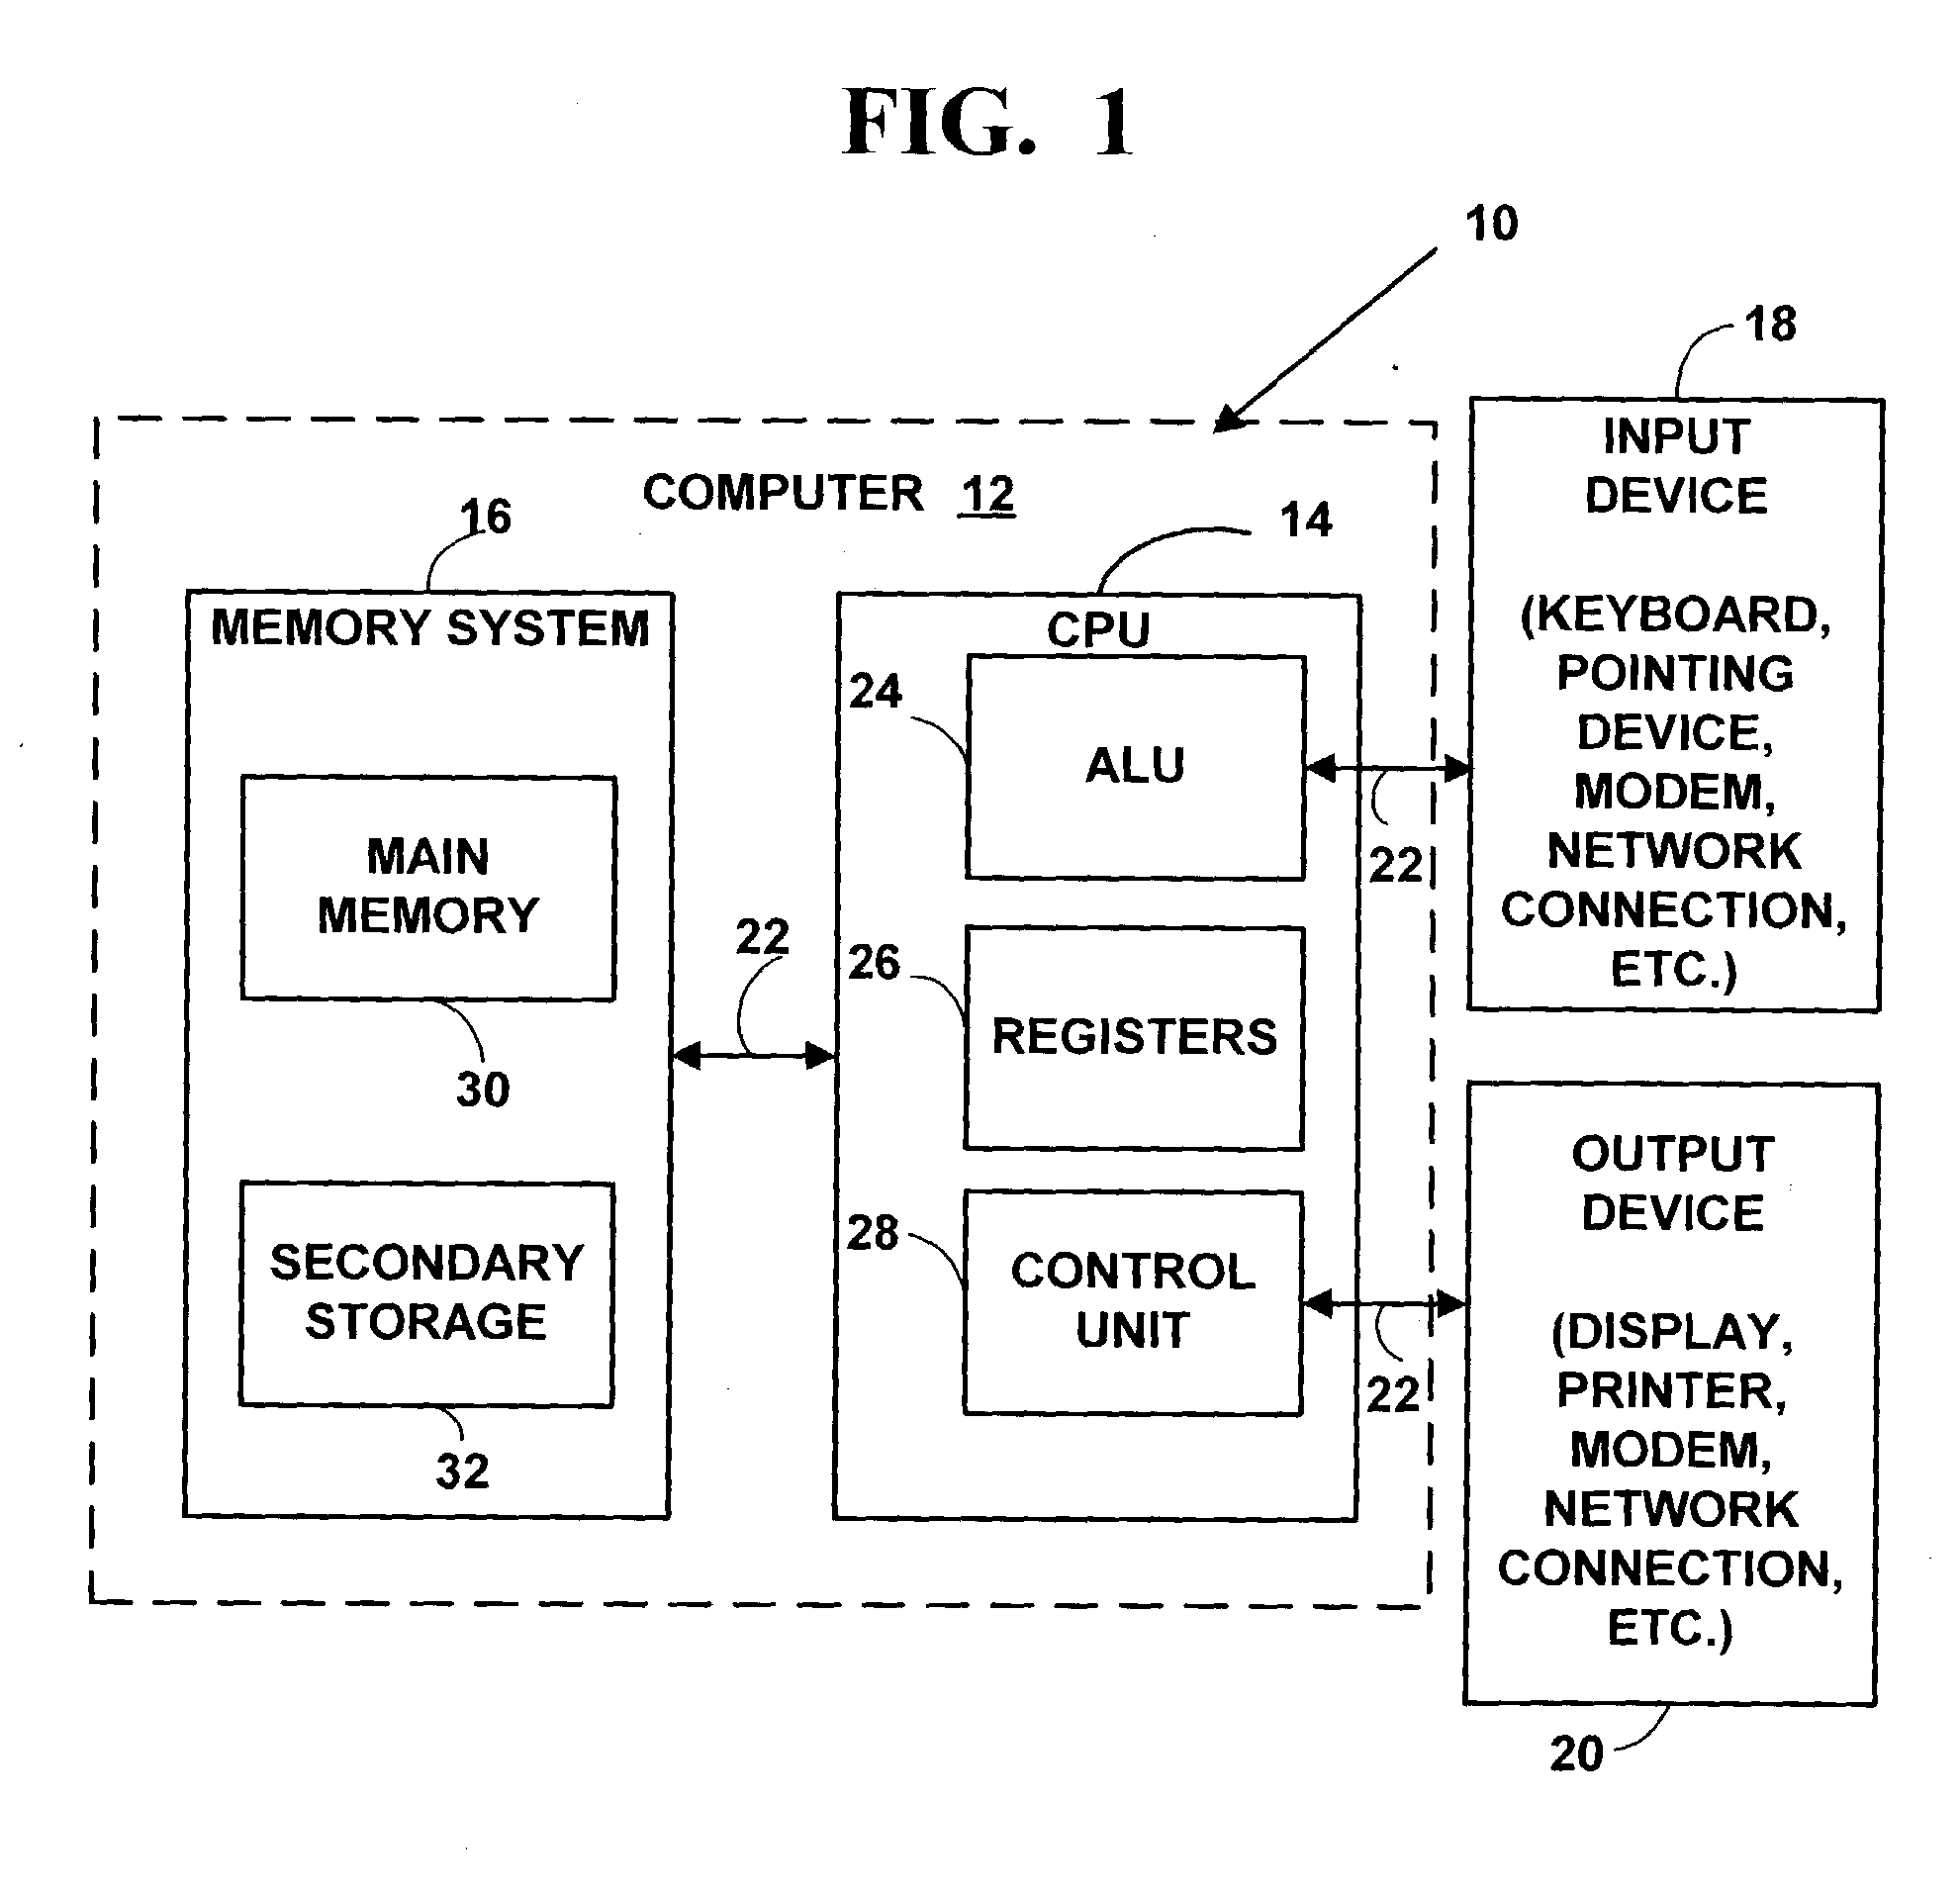 Methods and systems for obtaining computer software via a network